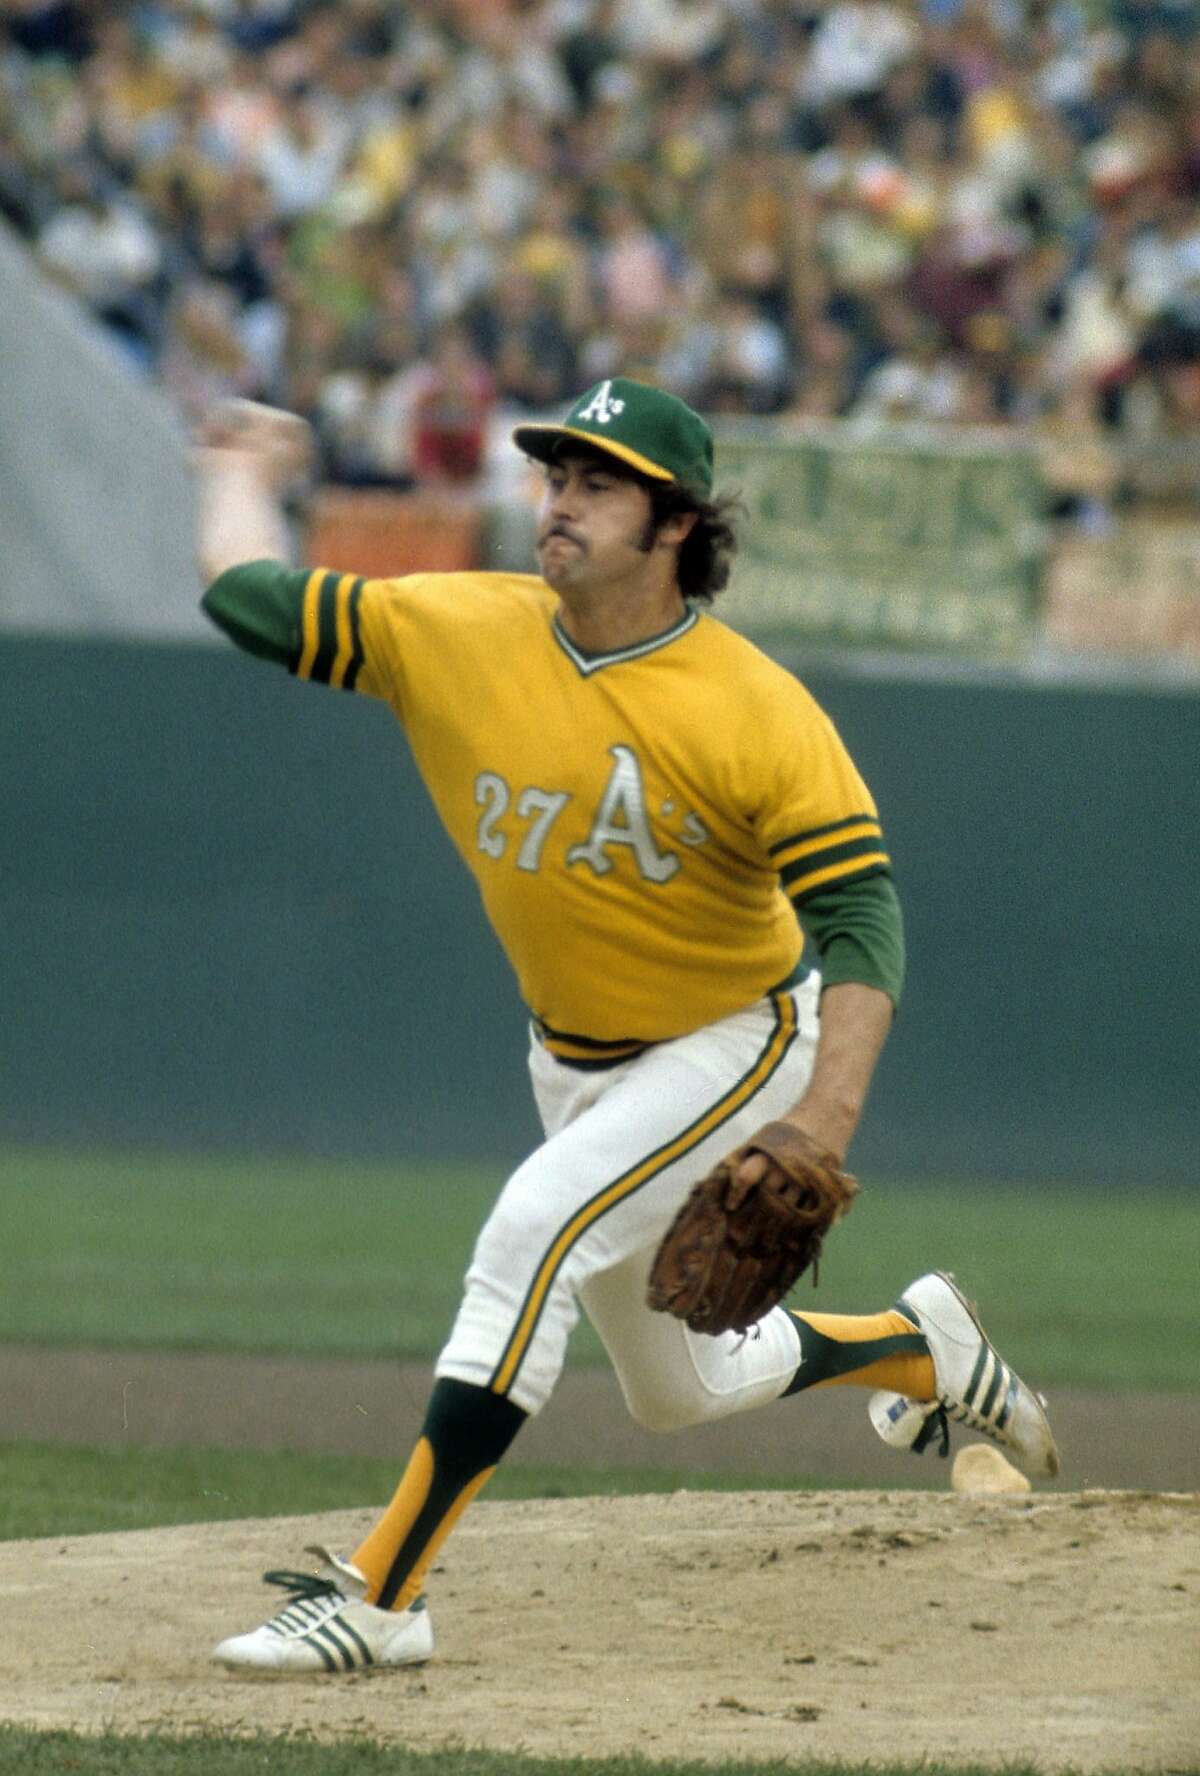 Today in Oakland A's history (5/8): Catfish Hunter throws perfect